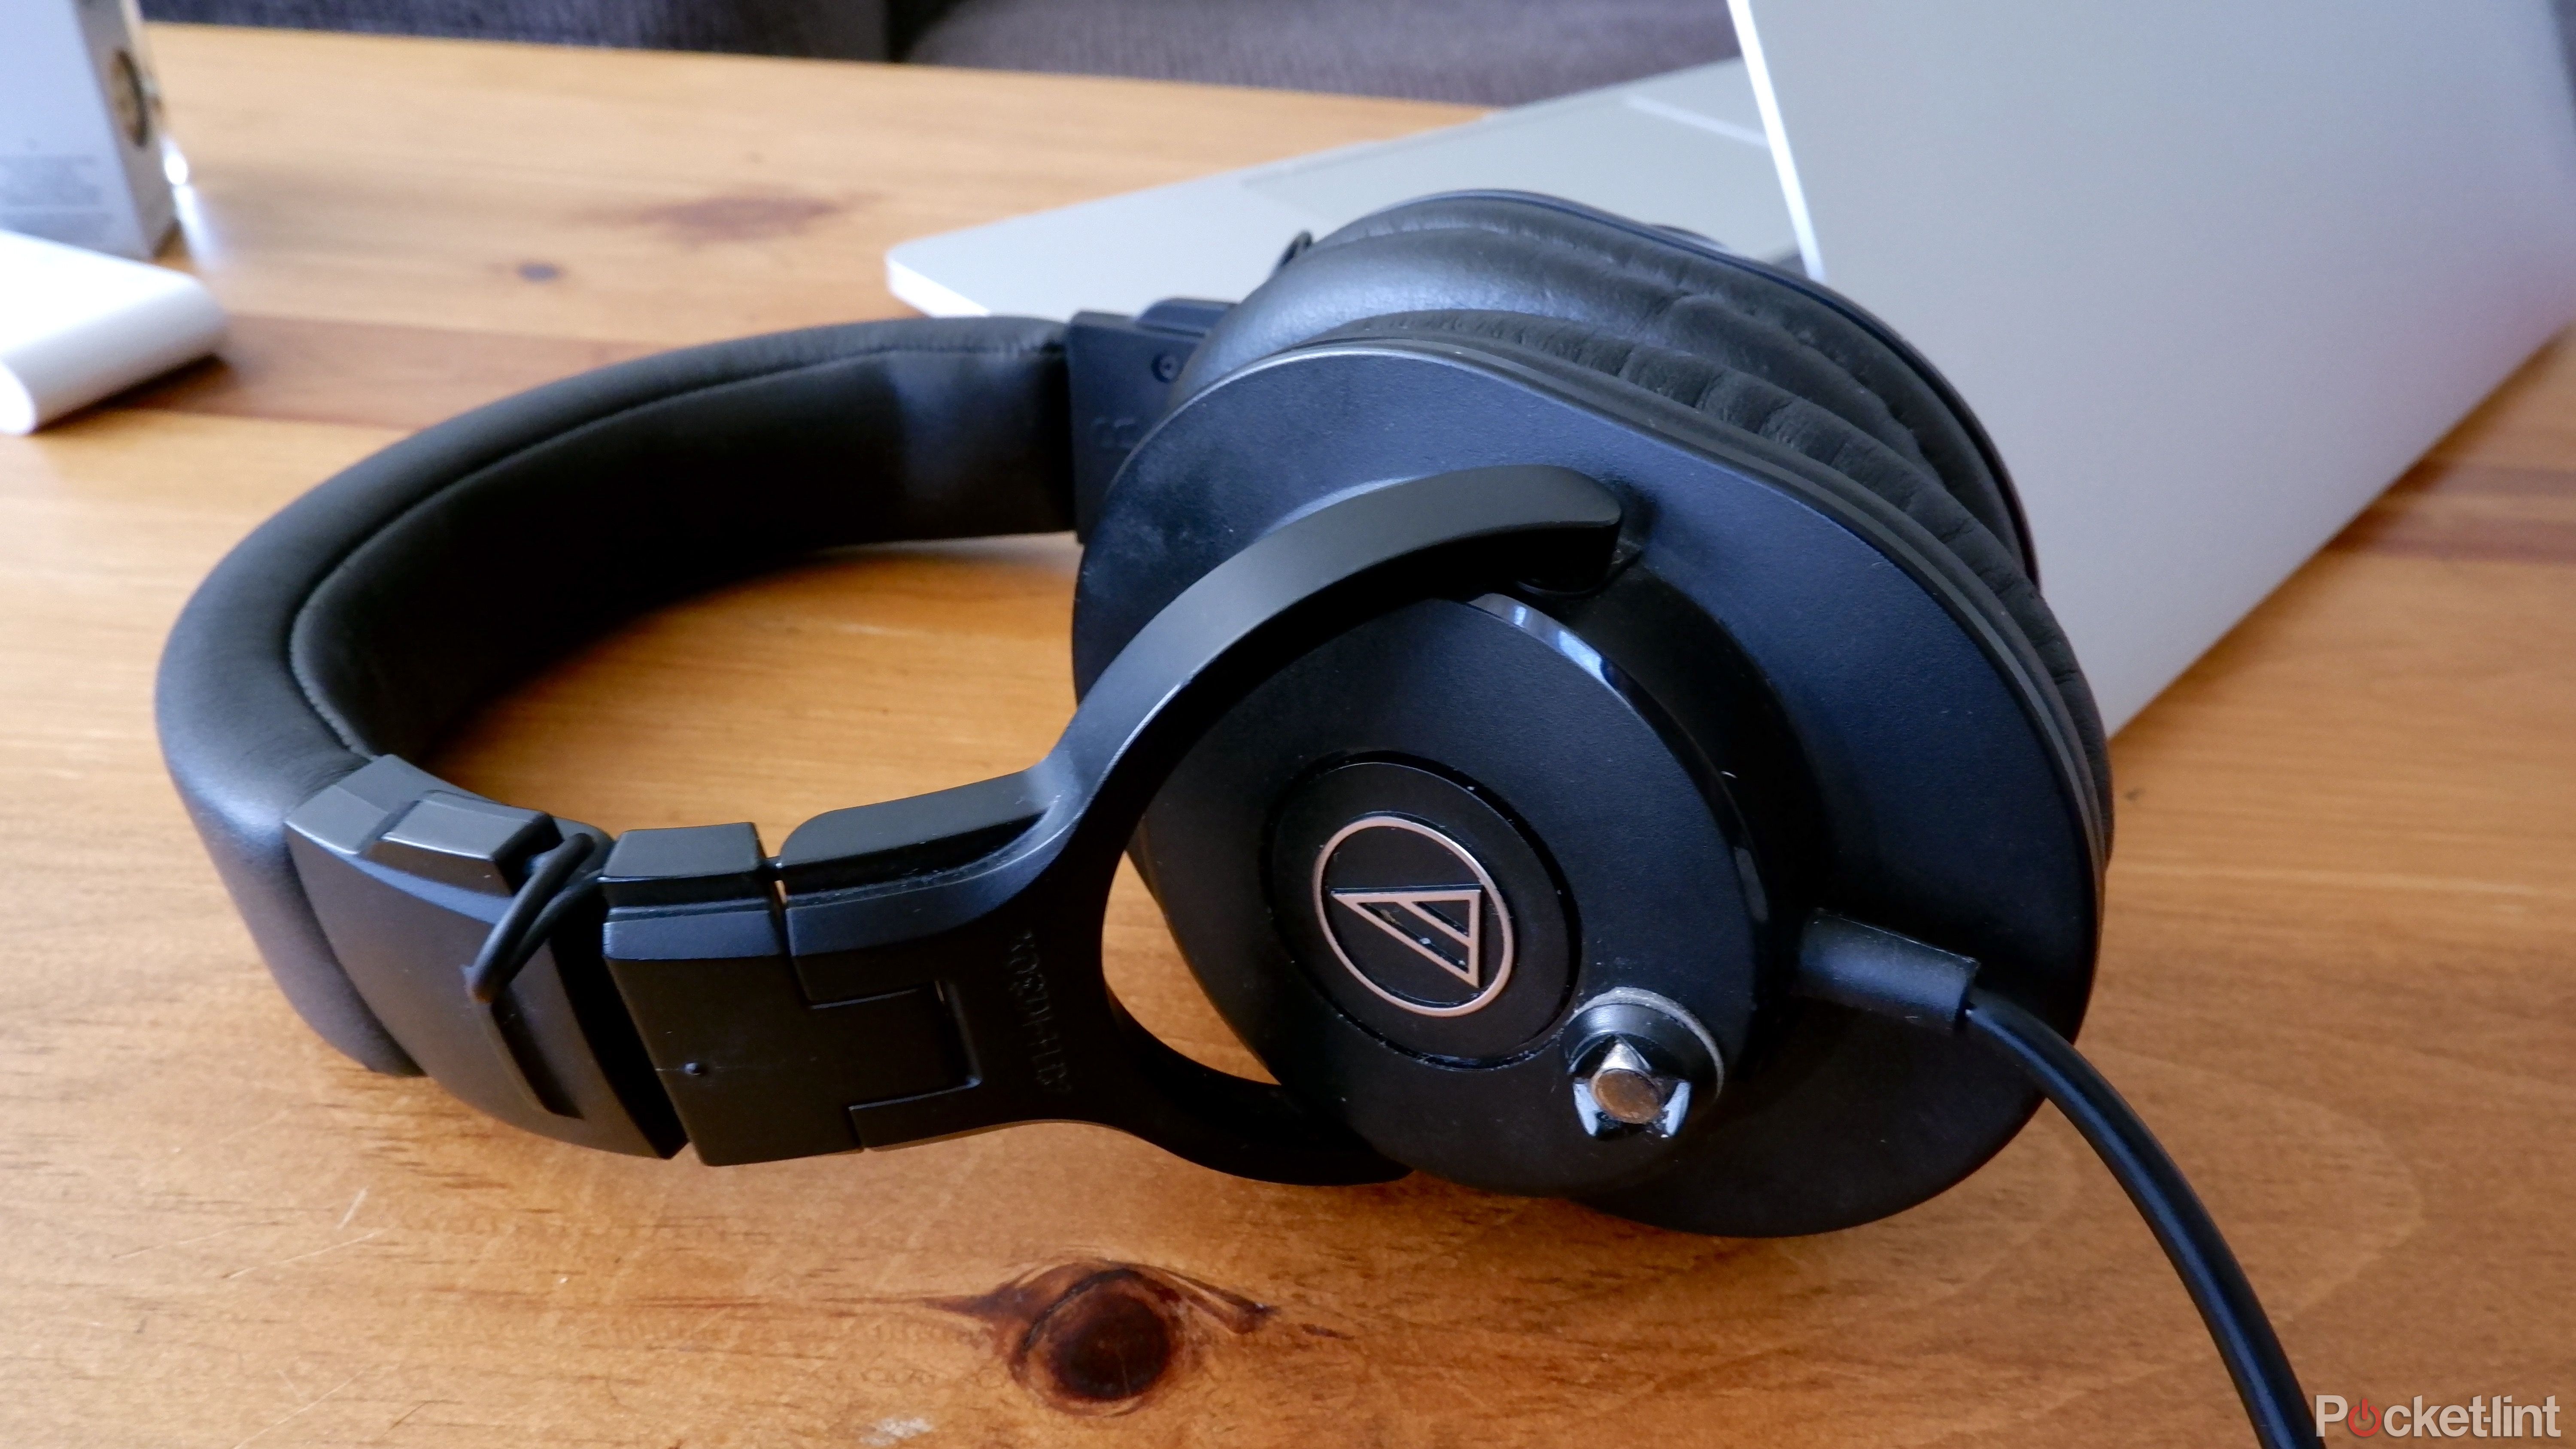 The Audio-Technica ATH-M30x on a coffee table in front of a Macbook Pro